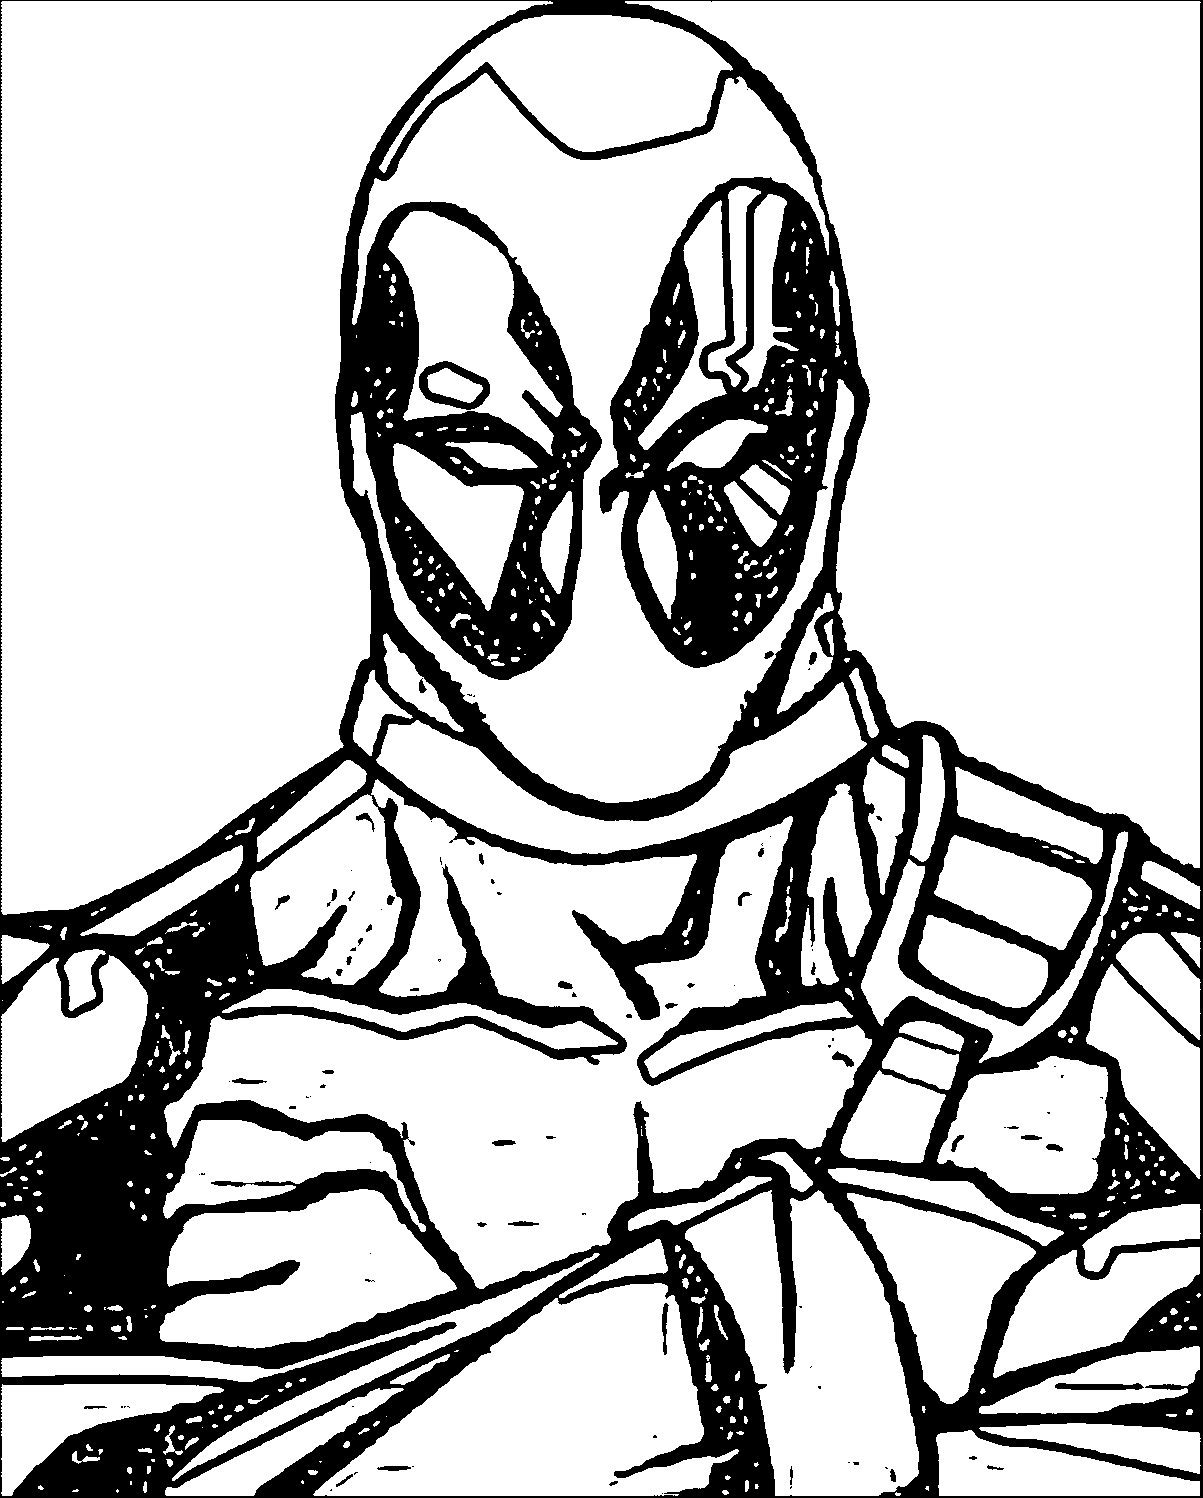 Deadpool Coloring Page WeColoringPage 027 | Wecoloringpage